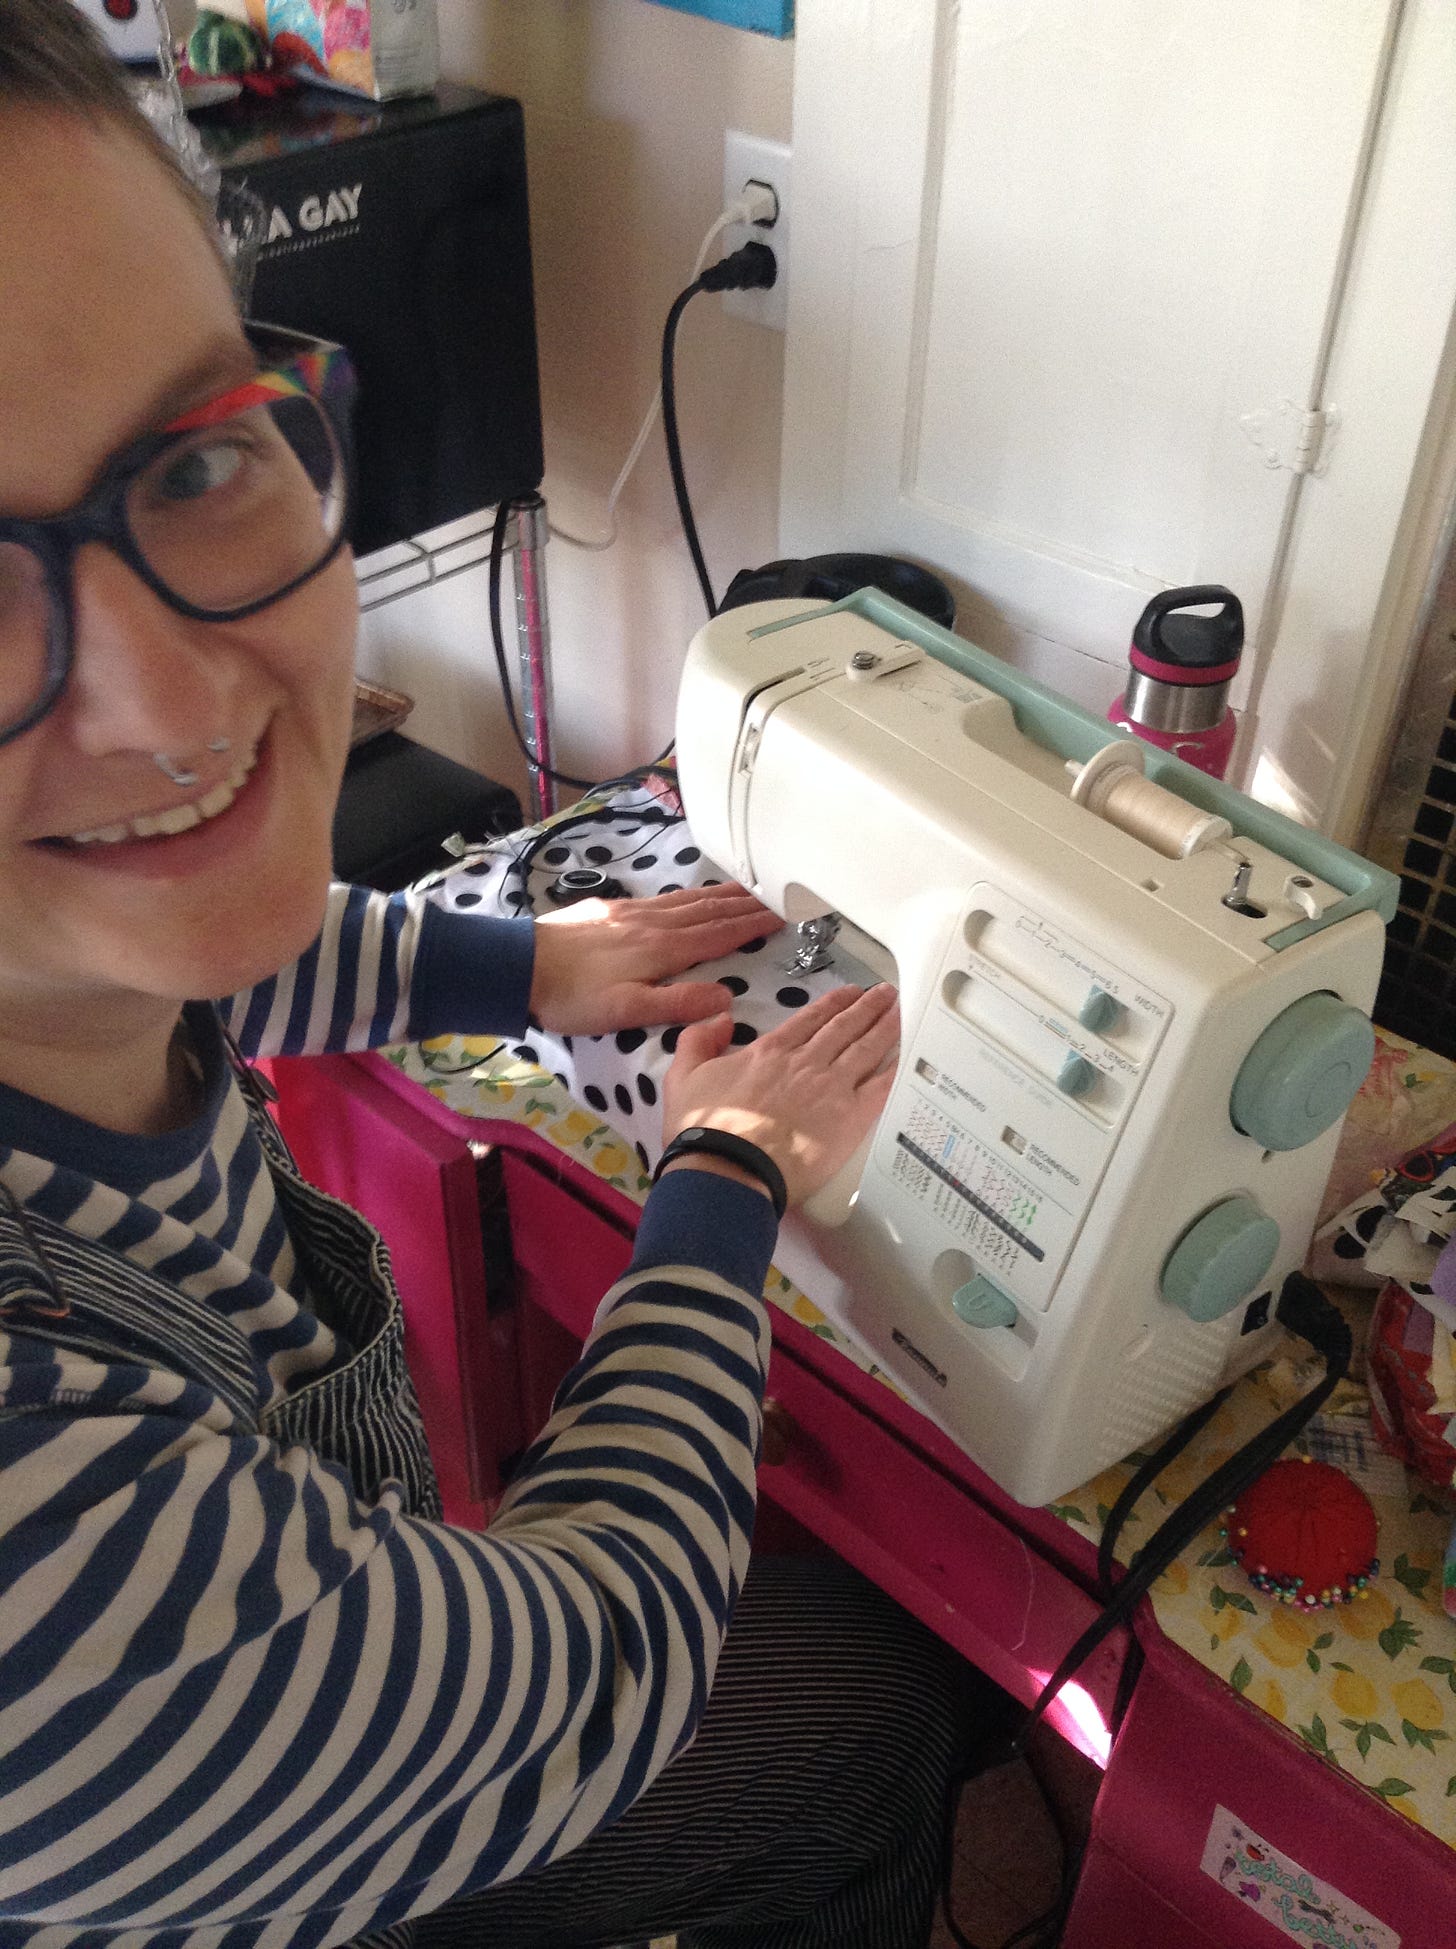 IMG DESCRIPTION: A white person sitting at a sewing machine, sewing a piece of black and white polka-dotted fabric. She is wearing a striped shirt and smiling widely.